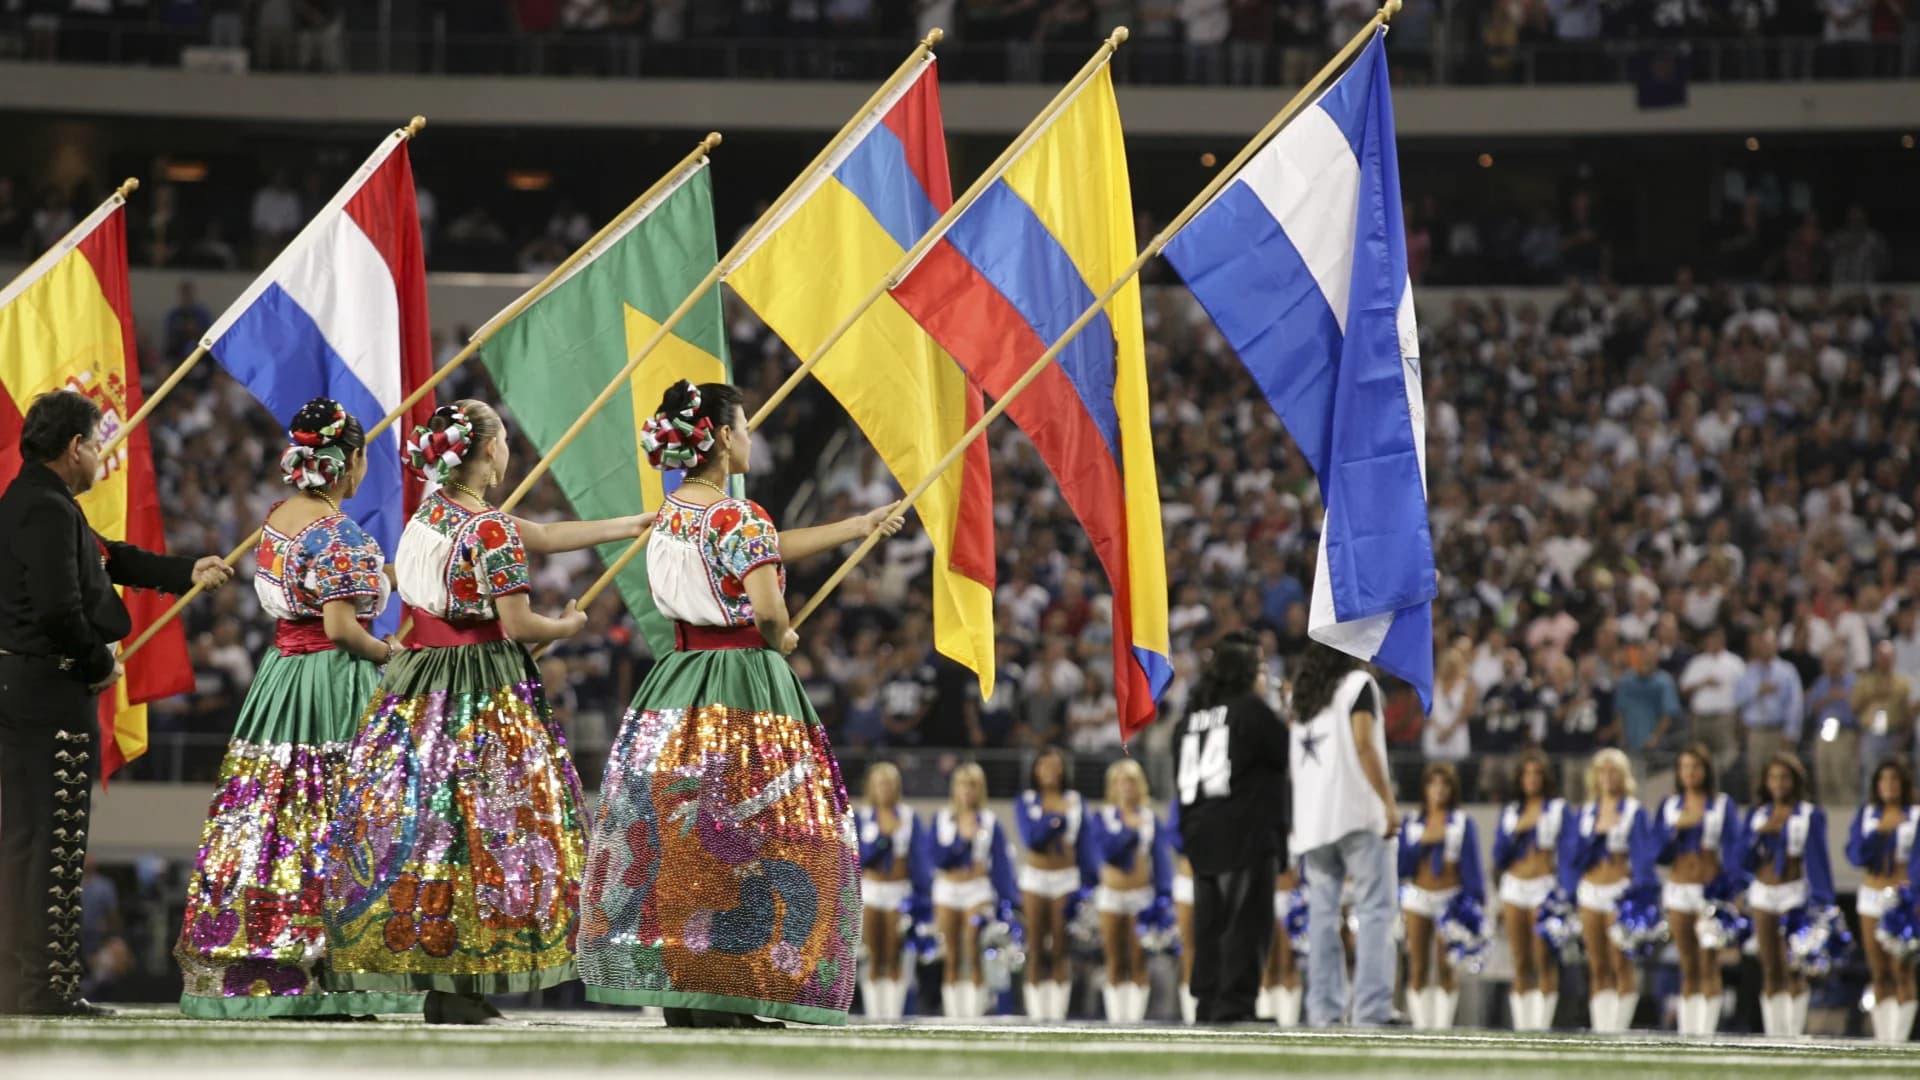 Guide: 5 things to know about National Hispanic Heritage Month